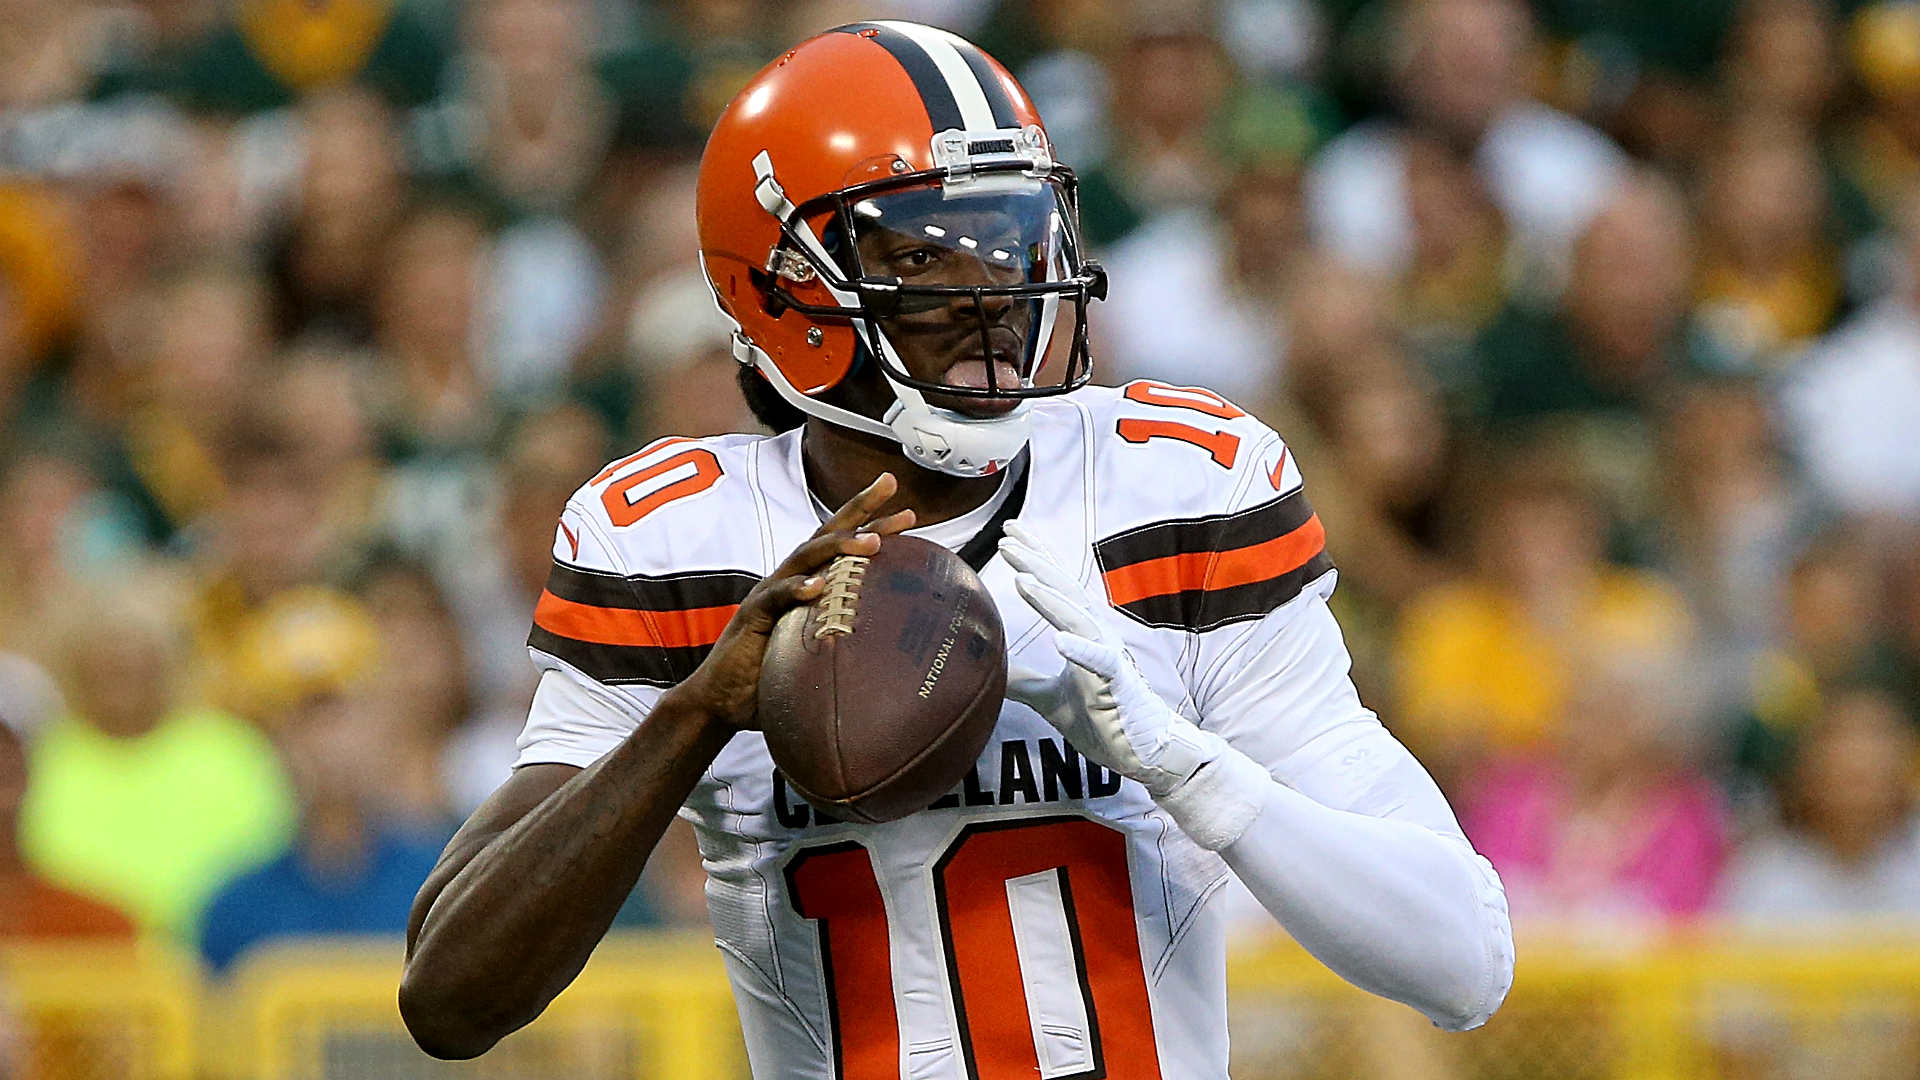 Robert Griffin III rejected offers from Ravens and Cardinals this